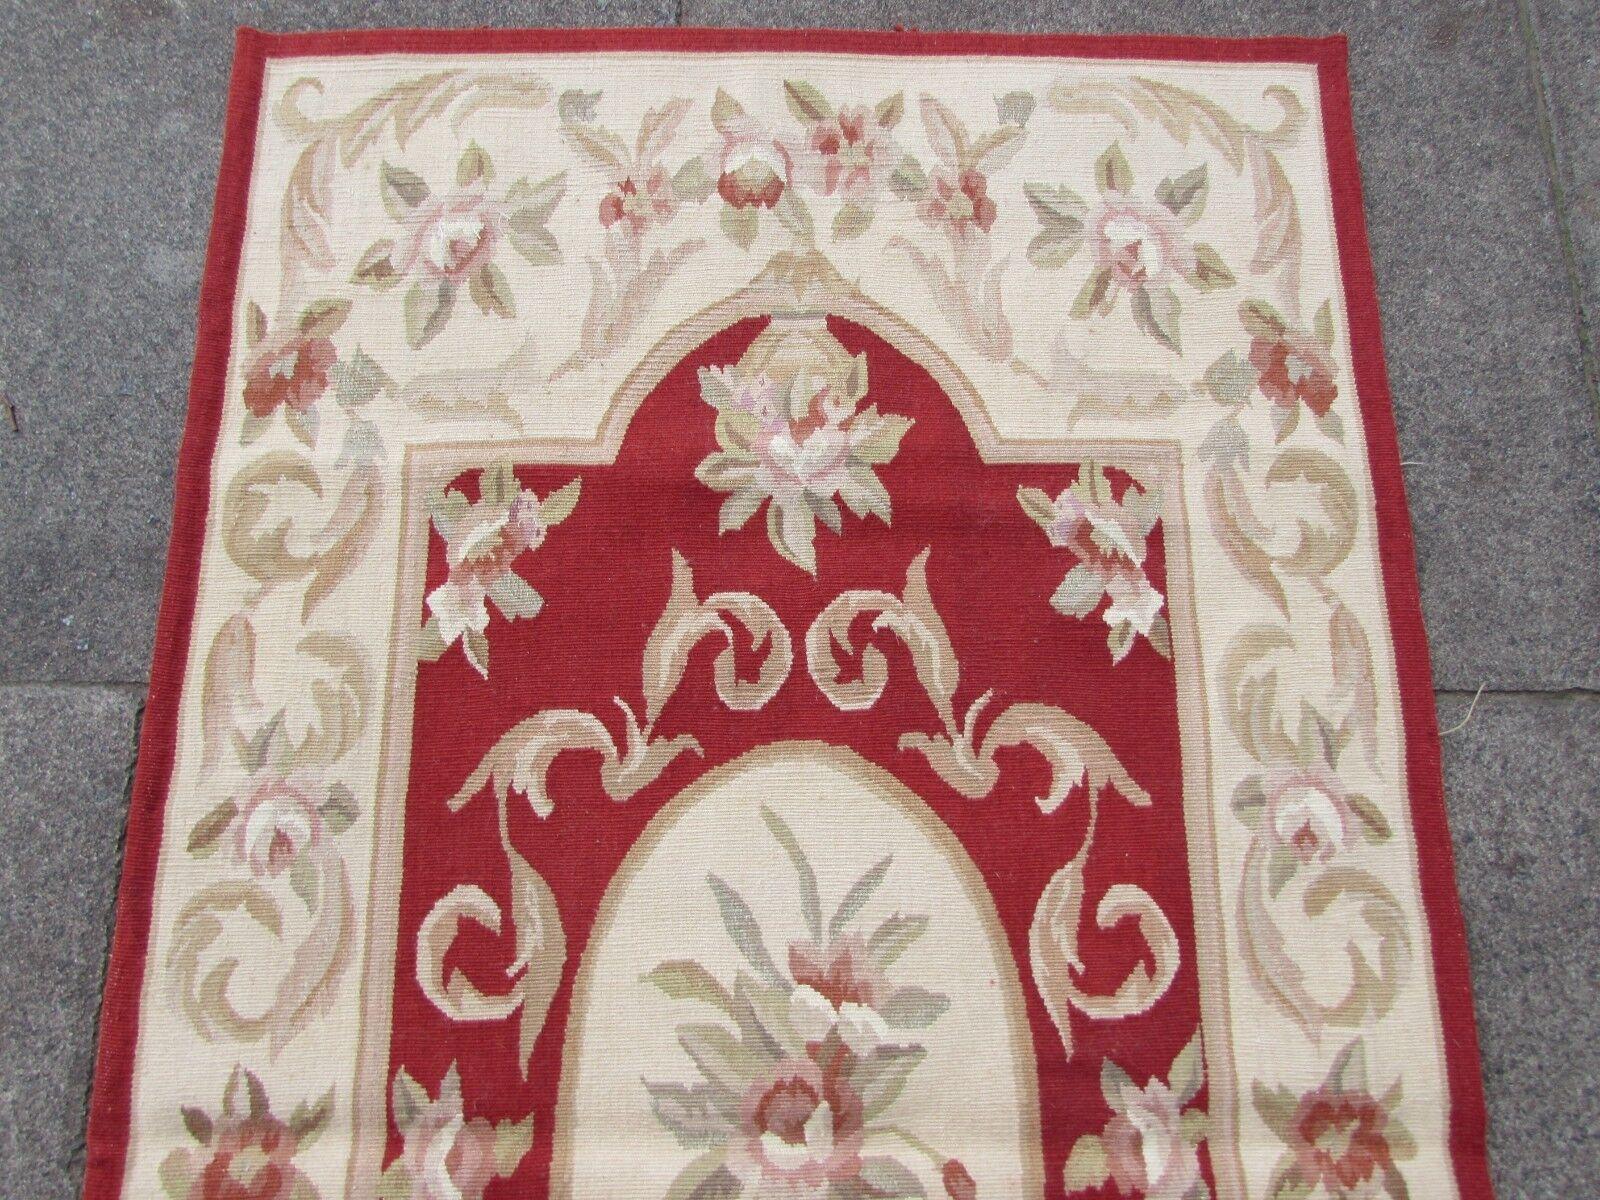 Handmade Vintage French AUbusson Rug 2.4' x 4.7', 1970s - 1Q67 For Sale 5